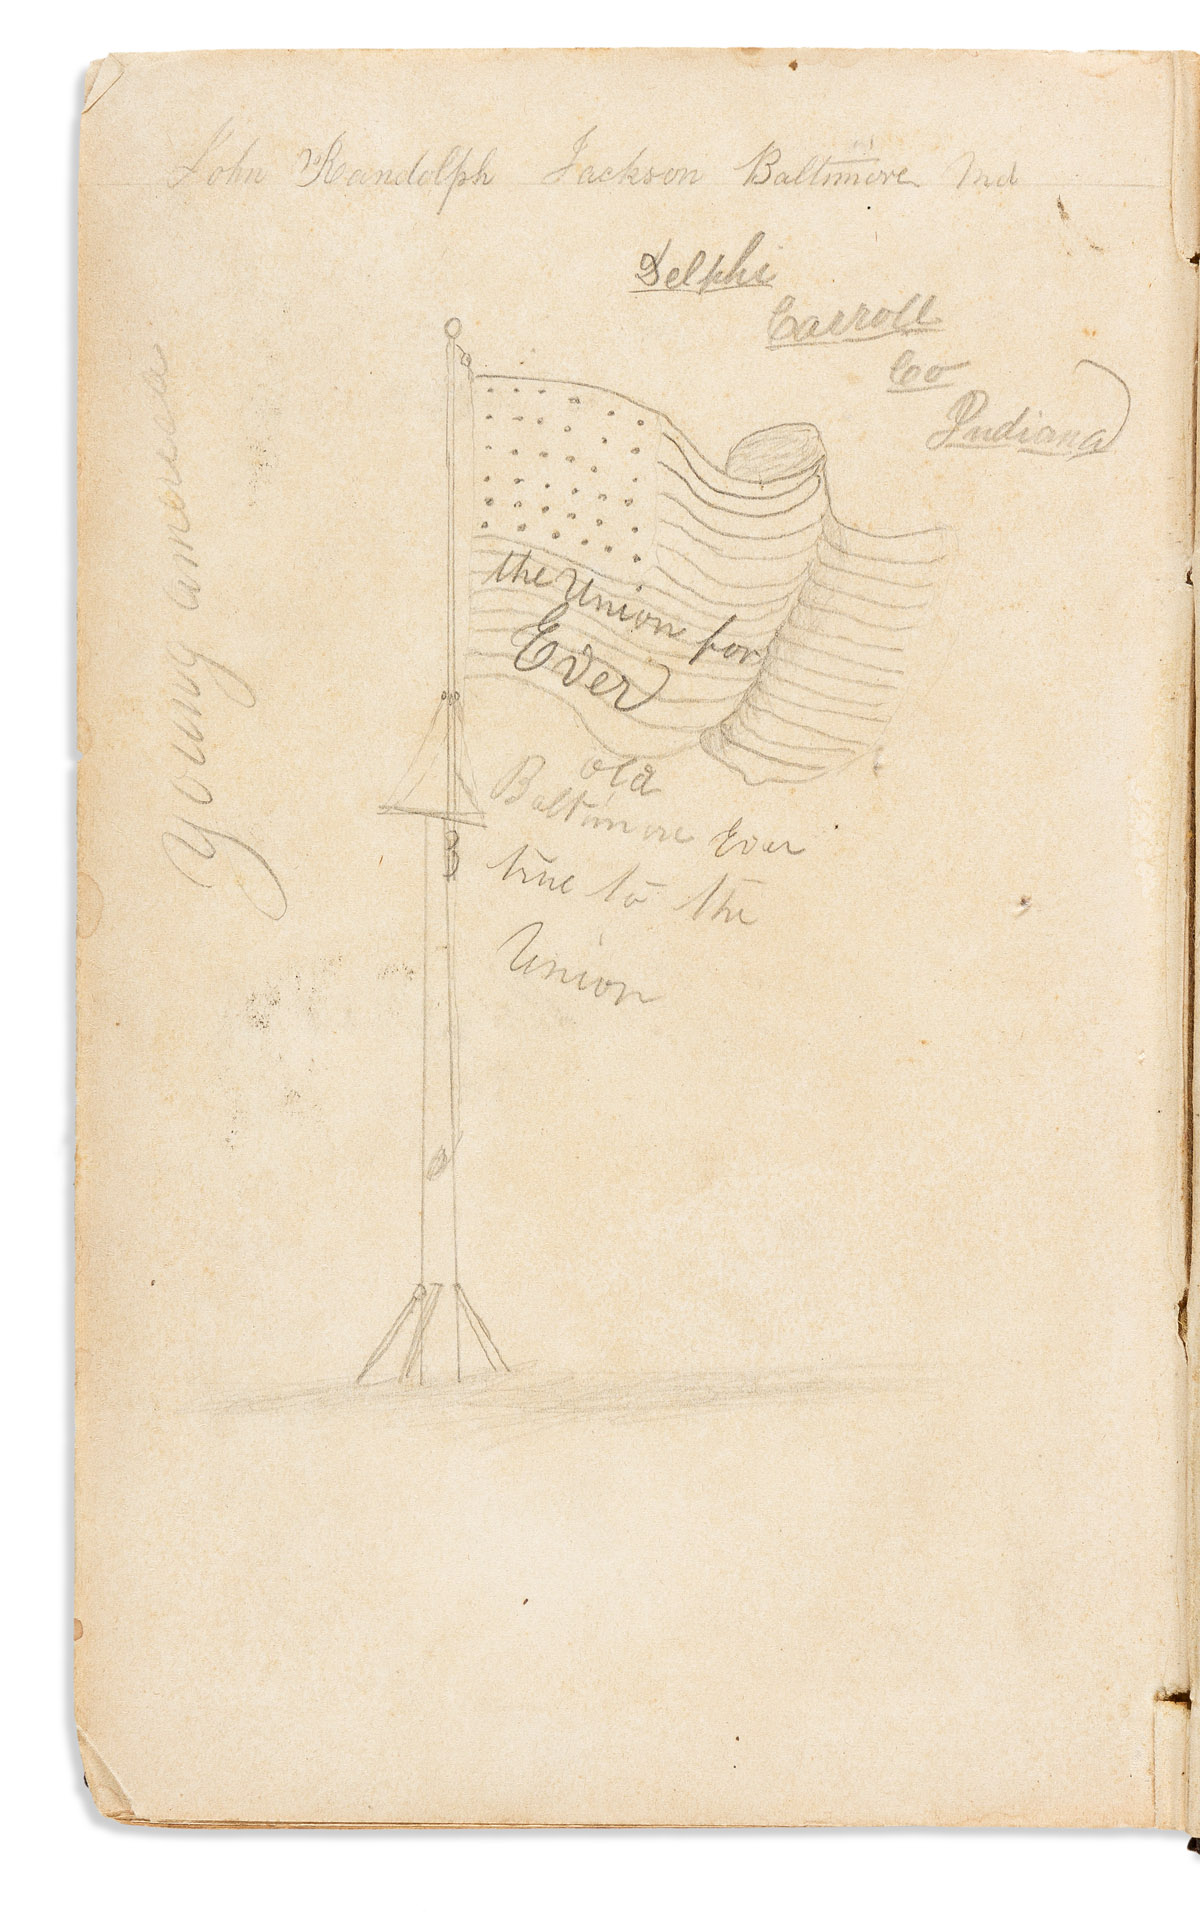 (CIVIL WAR.) A book defaced by a Union soldier with anti-rebel graffiti.